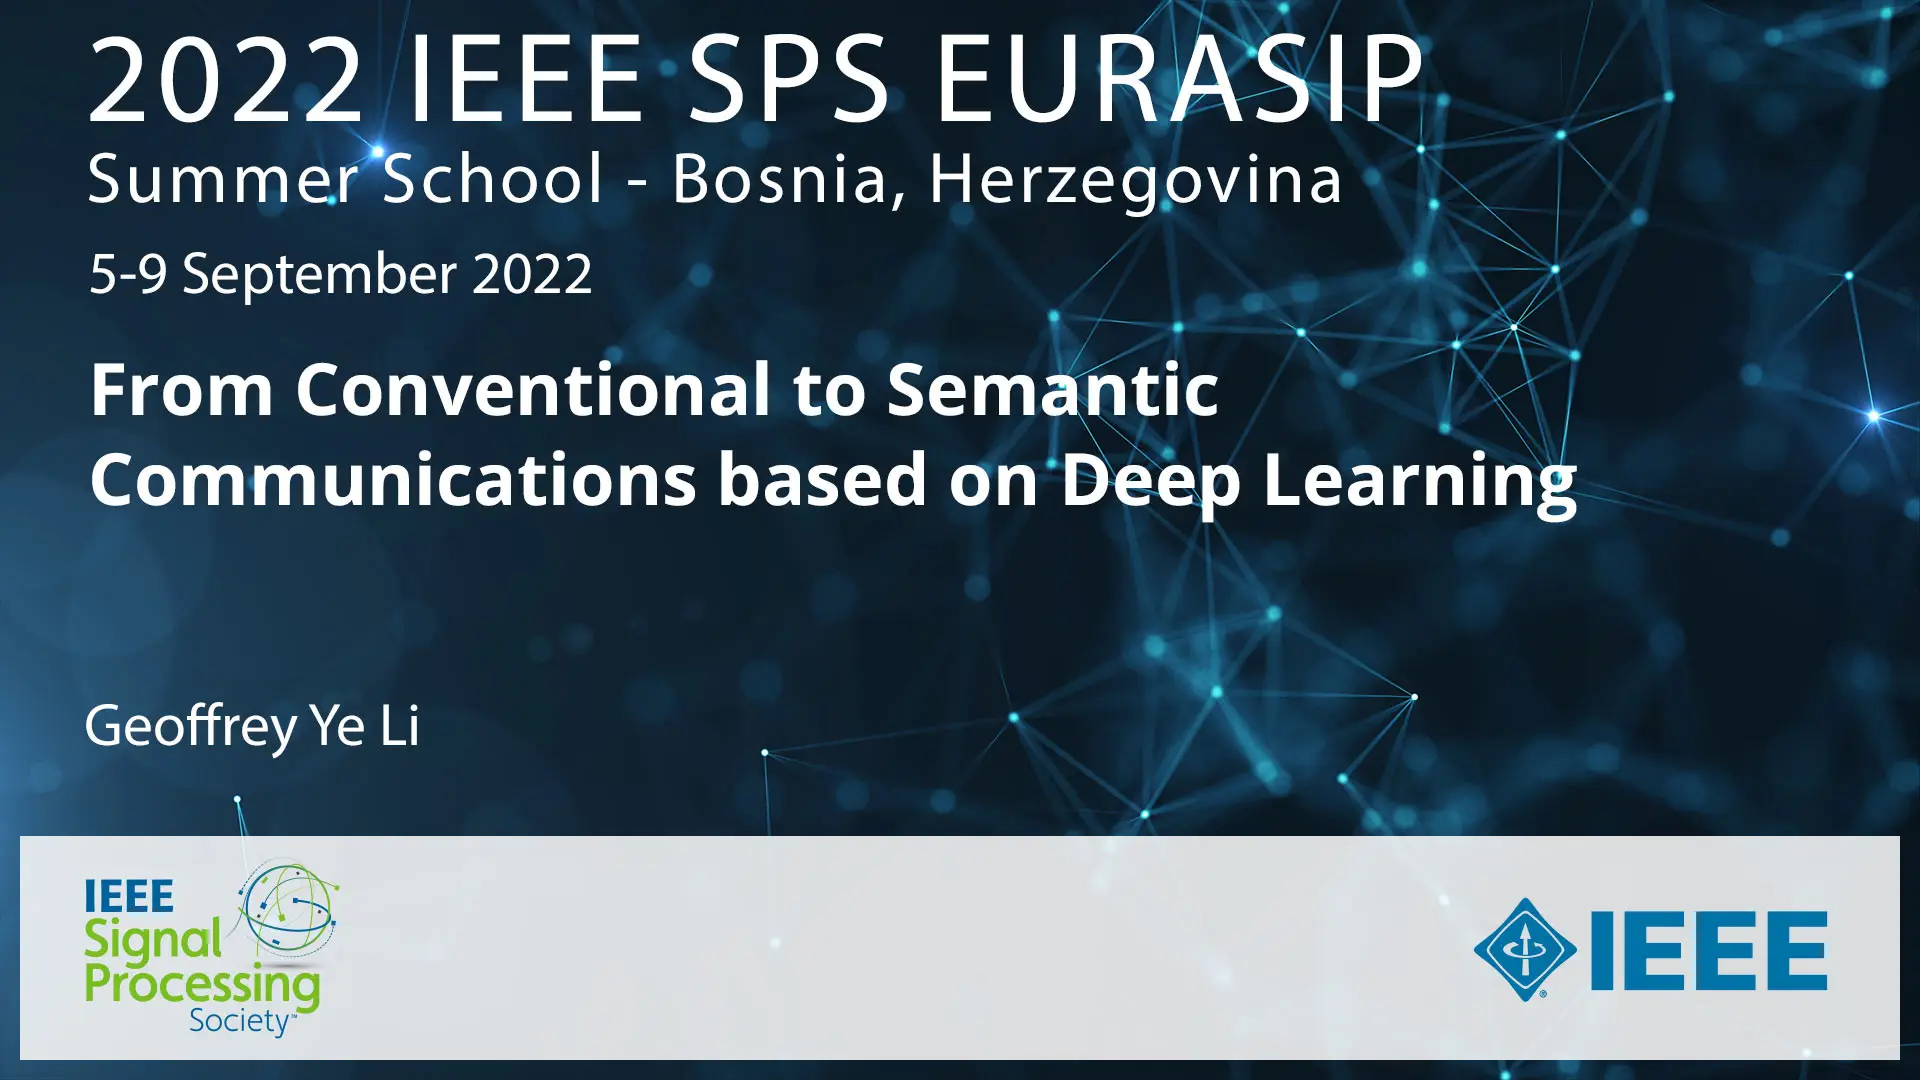 From Conventional to Semantic Communications based on Deep Learning